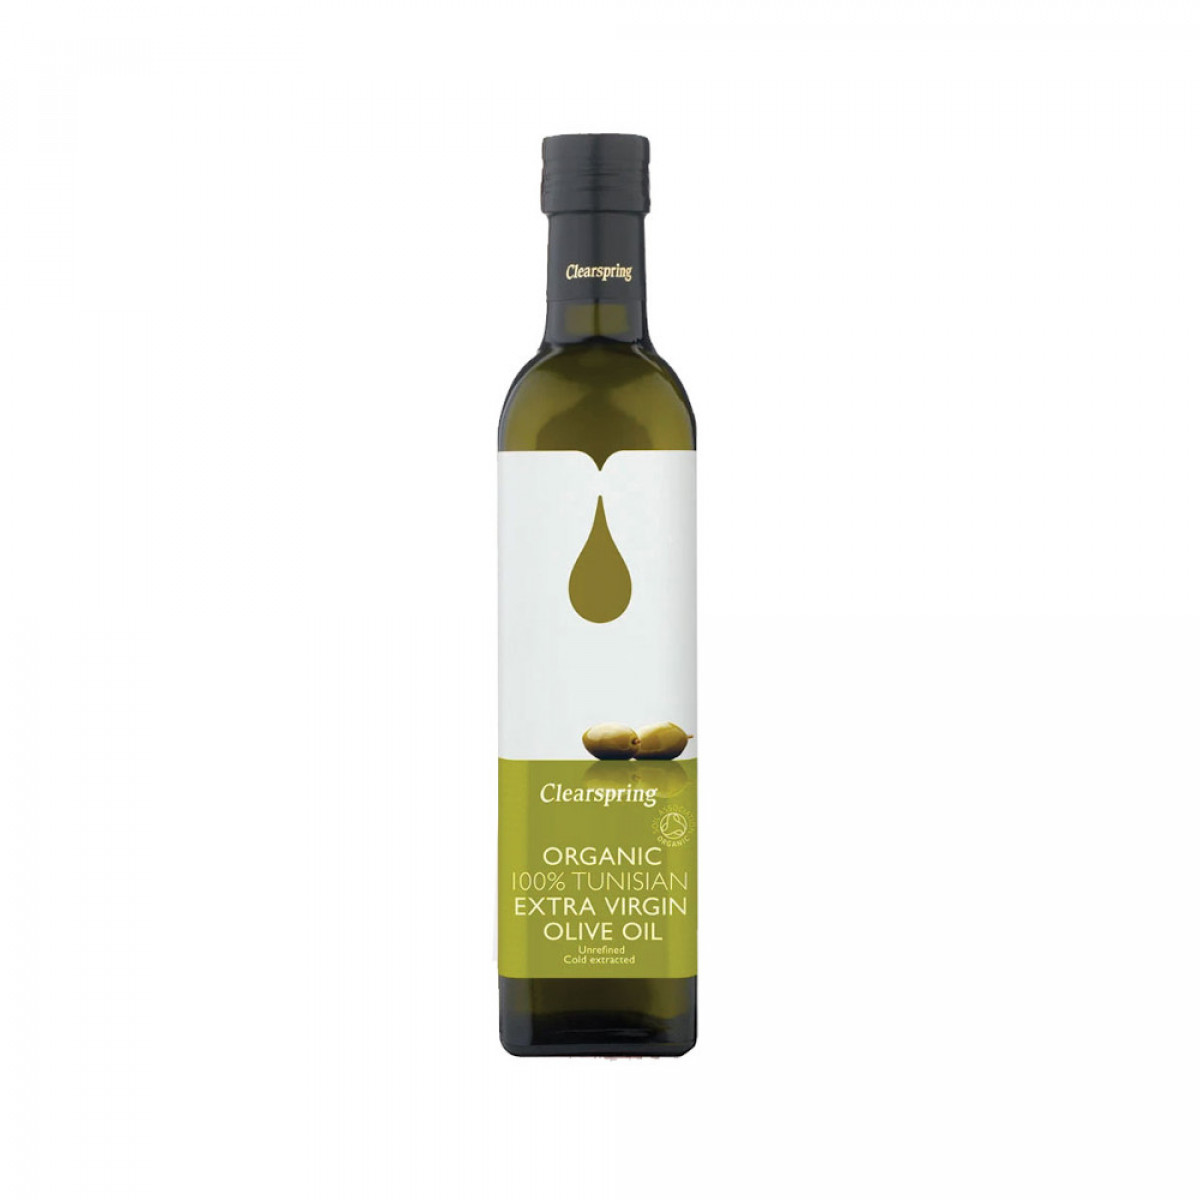 Product picture for Olive Oil - Tunisian Extra Virgin